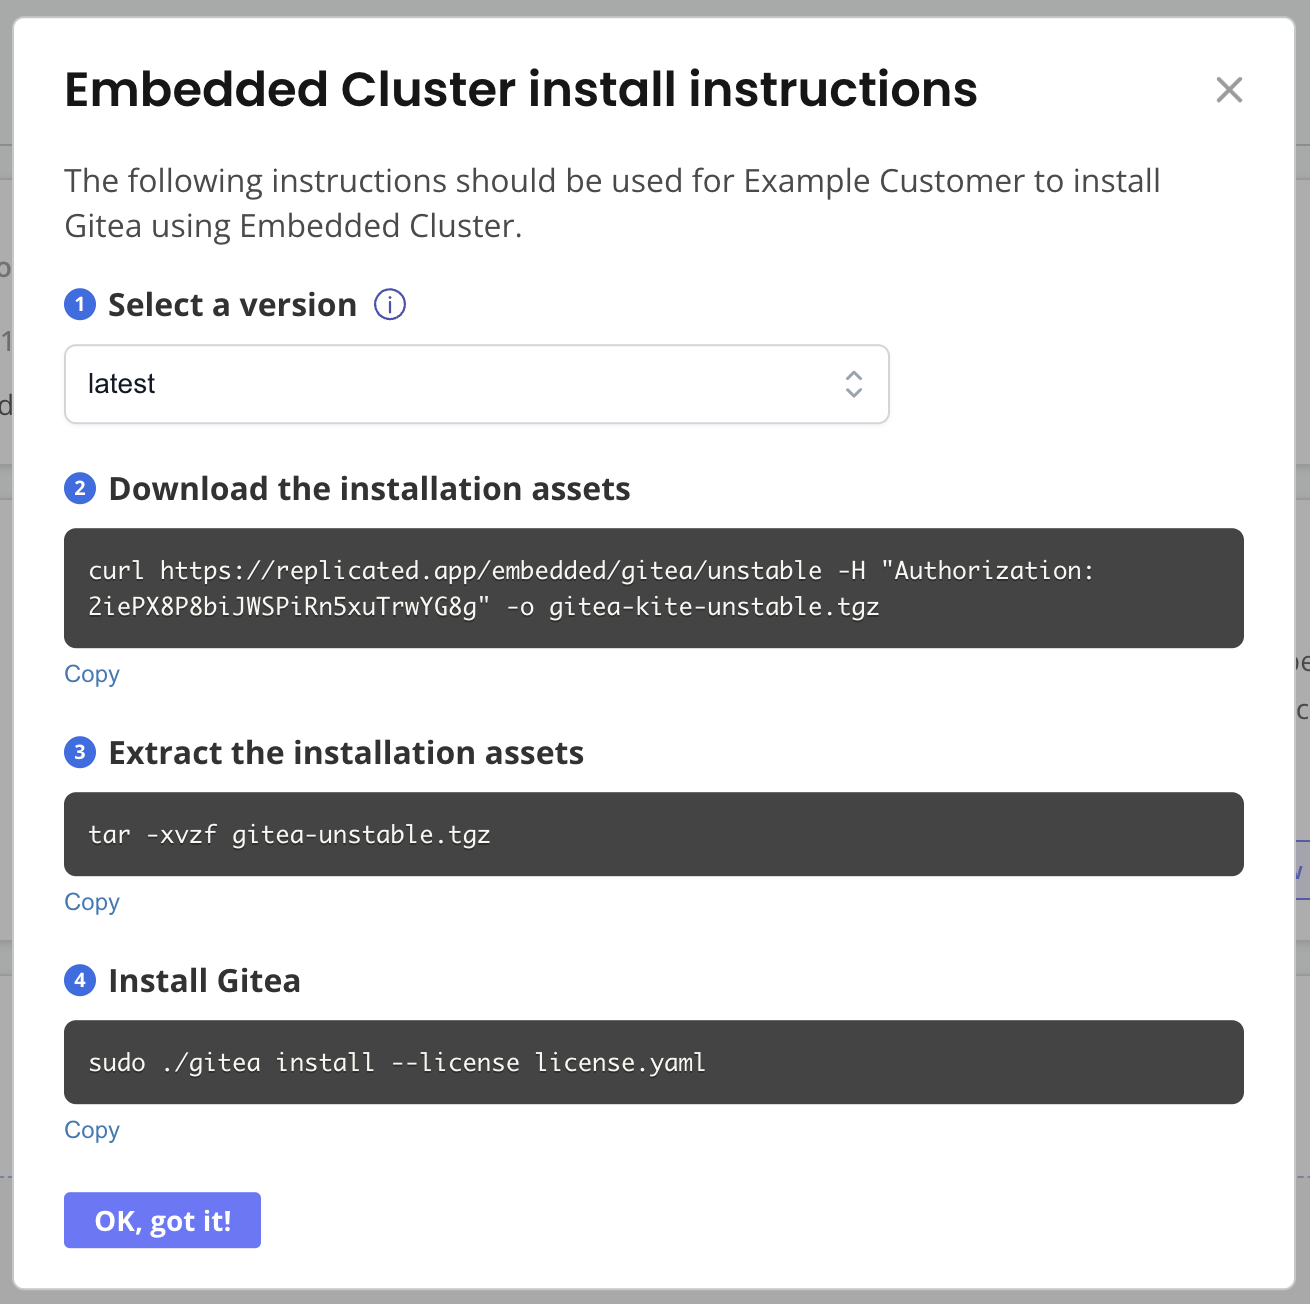 Embedded cluster install instructions